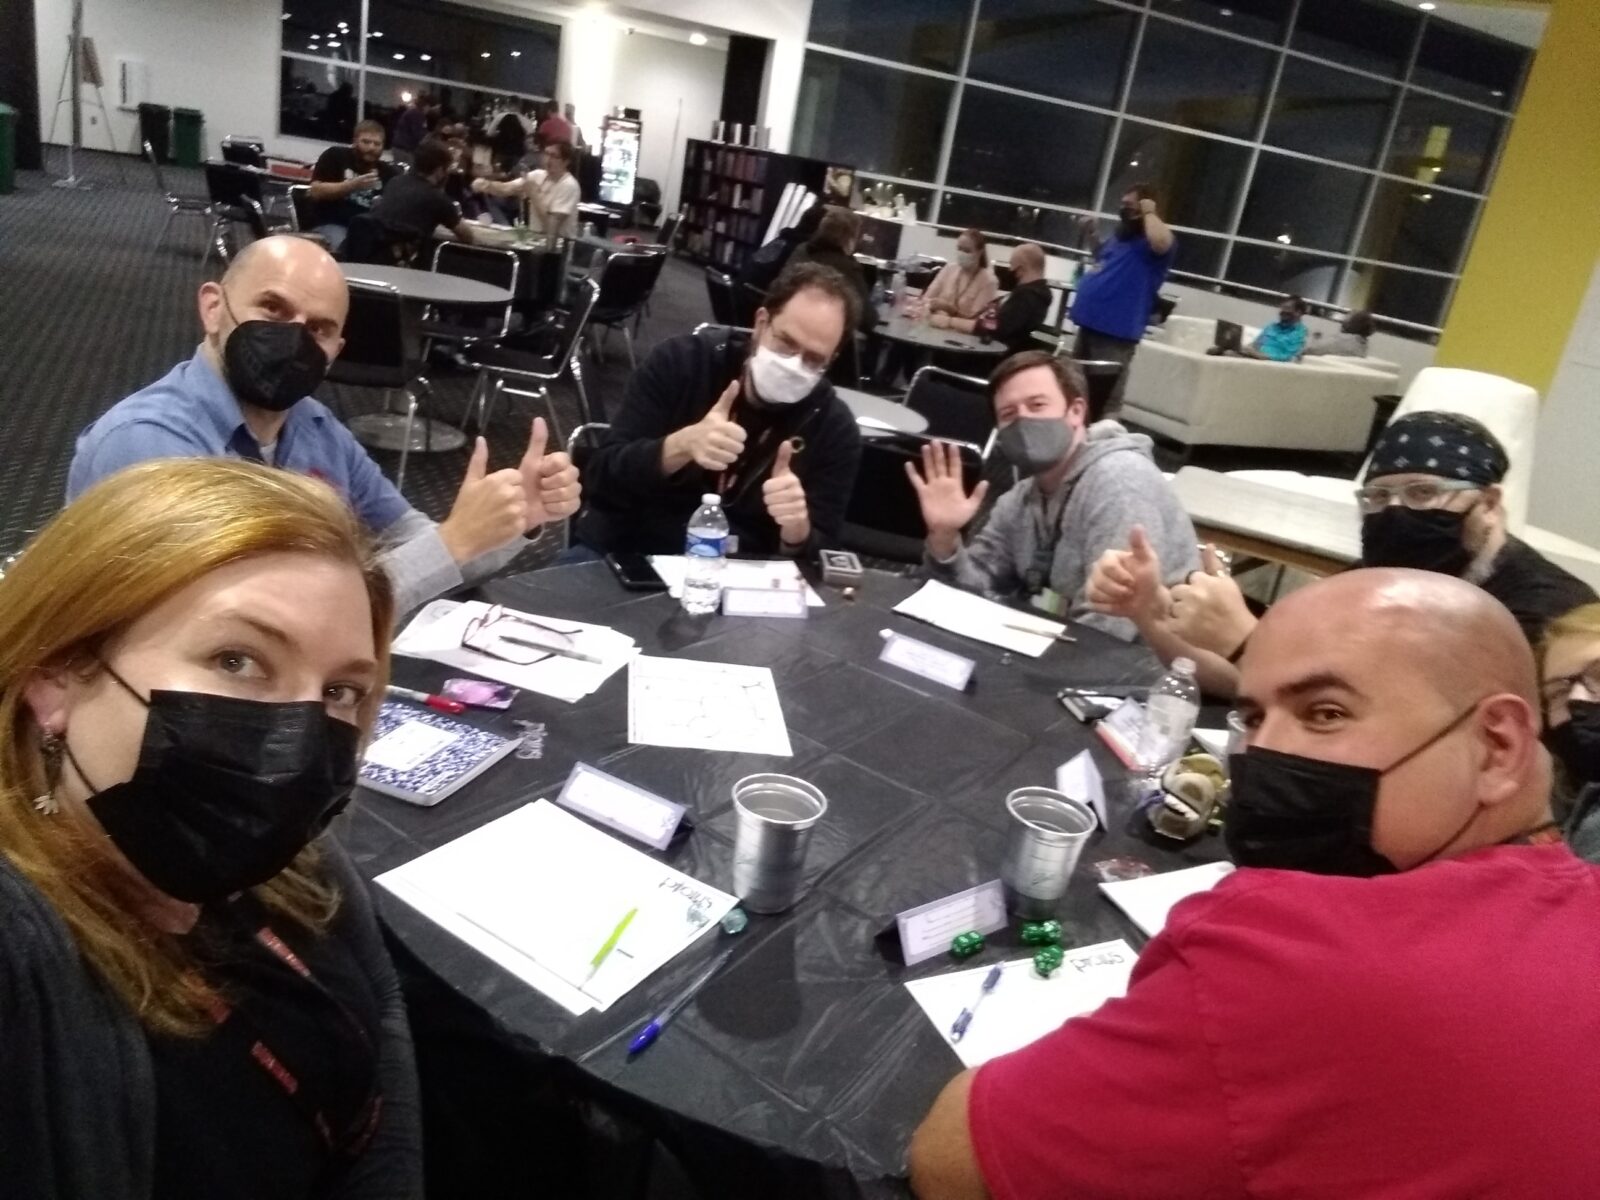 People in face masks gathered around a round table playing TTRPGs.